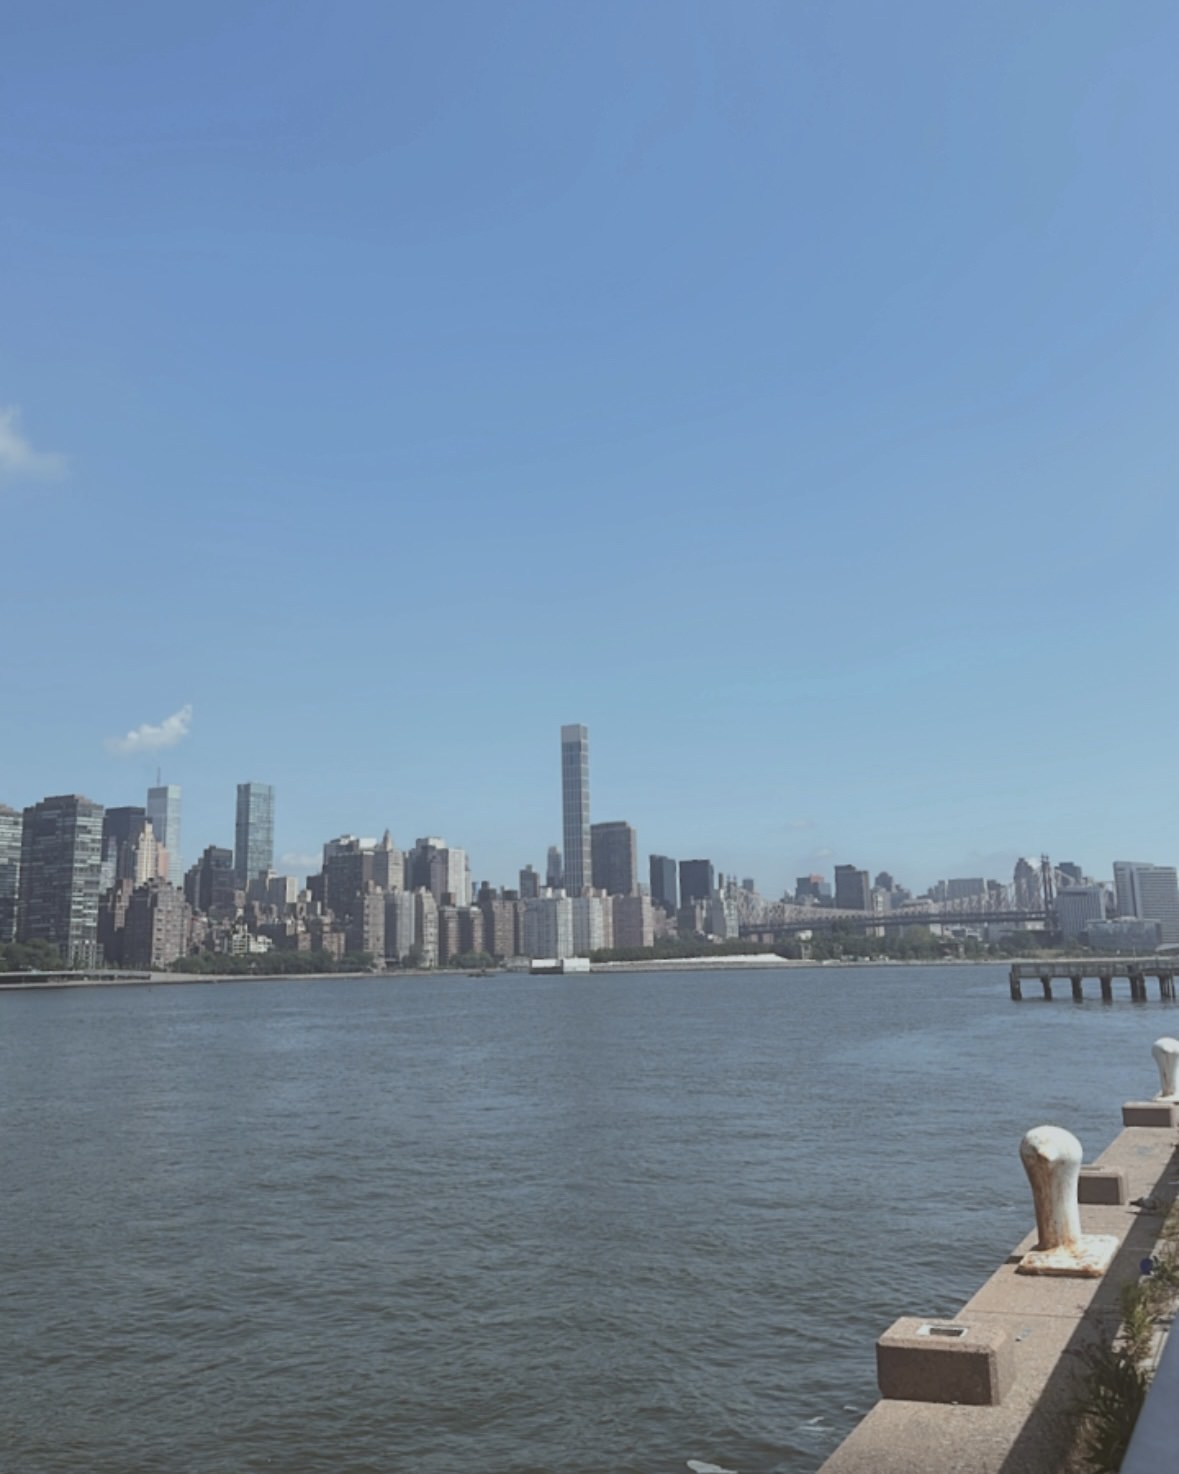 The New York City skyline viewed from Gantry Plaza State Park.